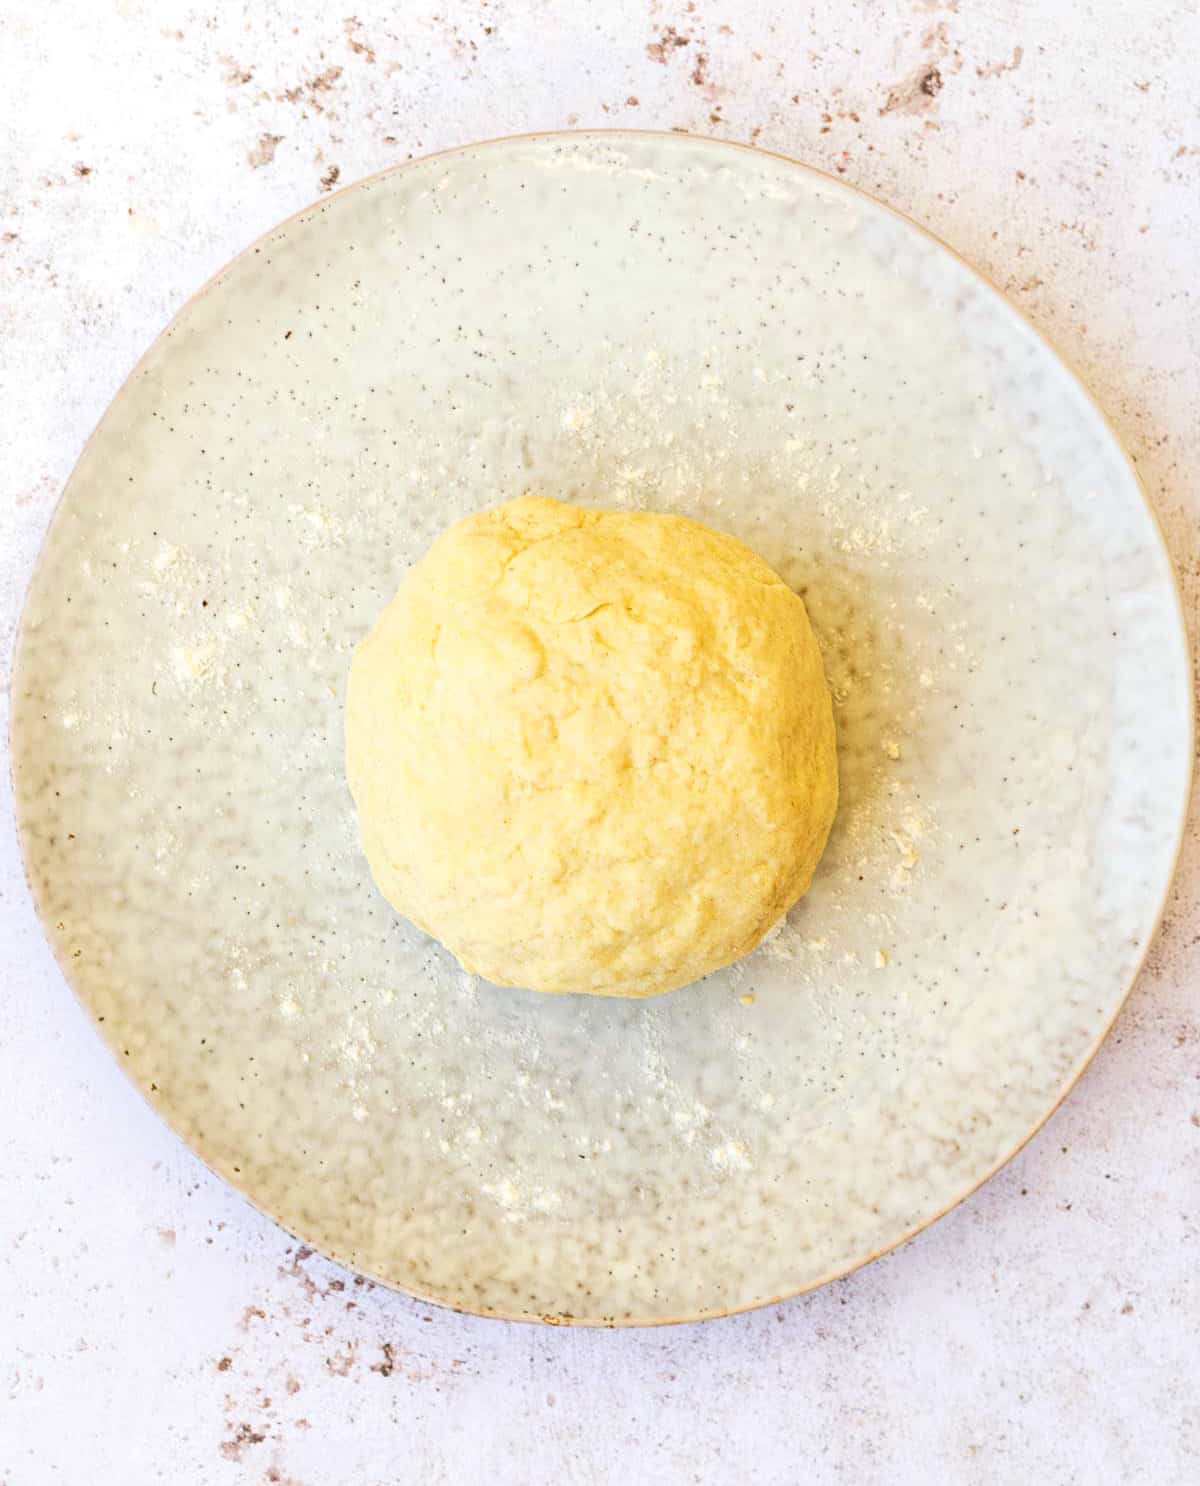 Ball of yeast free quick pizza dough on a round plate